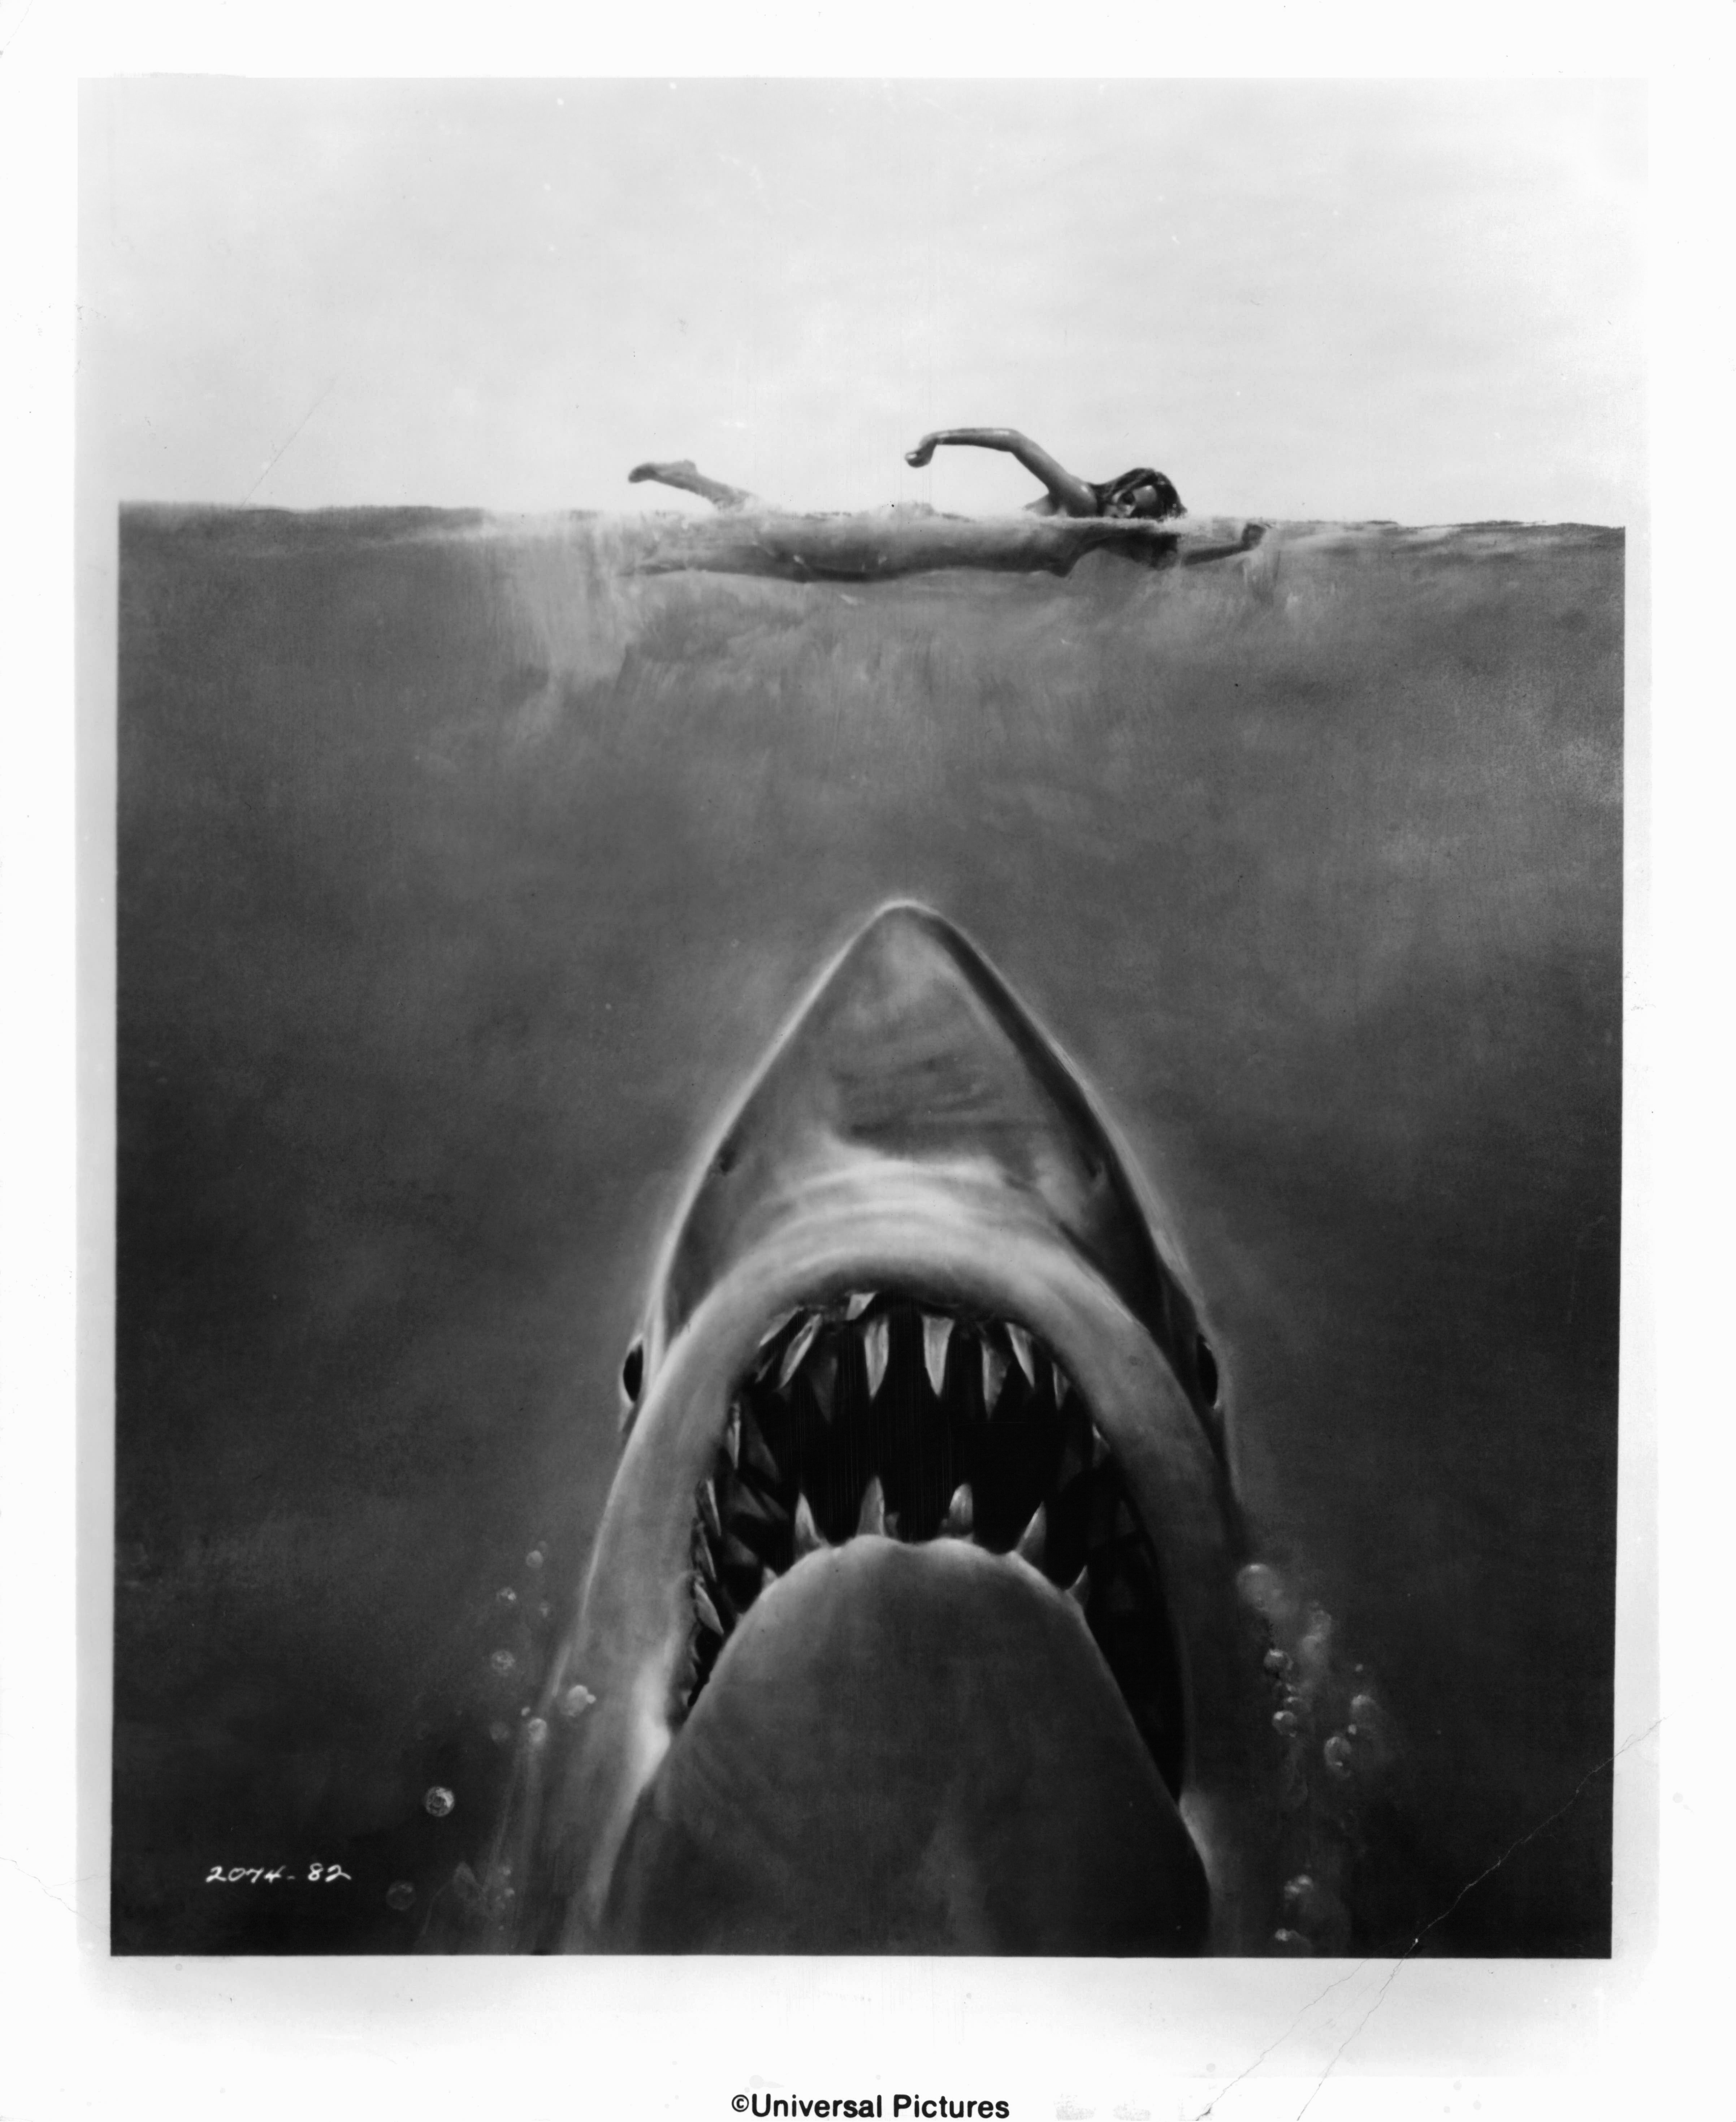 Susan Backlinie swimming as the great white shark swims up in publicity art for the film "Jaws" in 1975 | Source: Getty Images